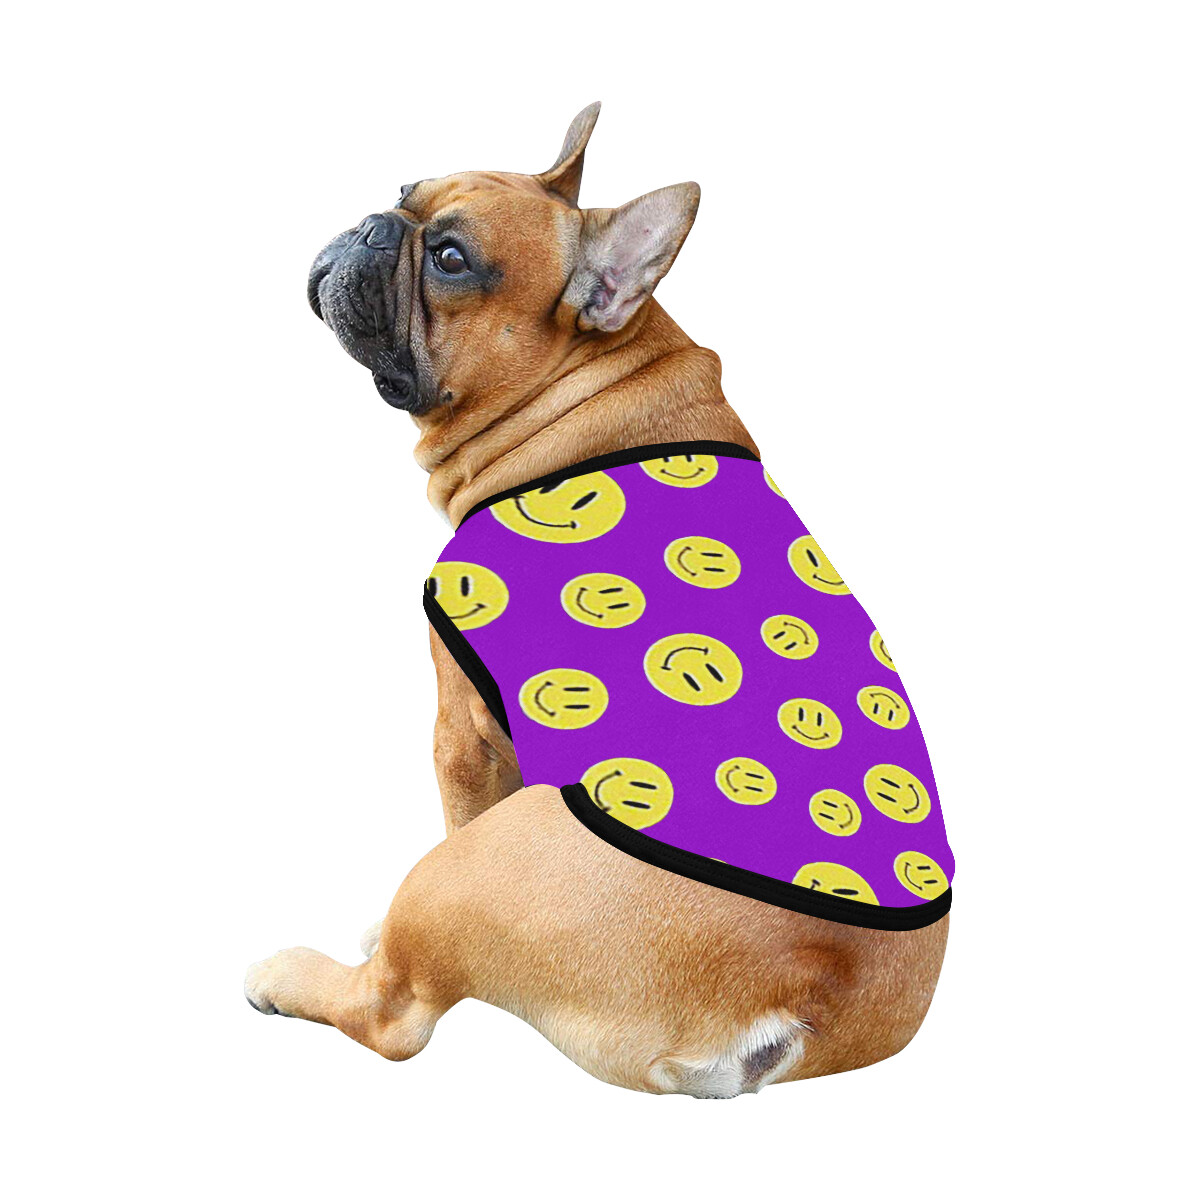 🐕 Happy faces Dog Tank Top, Dog shirt, Dog clothes, Gifts, front back print, 7 sizes XS to 3XL, dog t-shirt, dog t-shirt, dog gift, dark violet